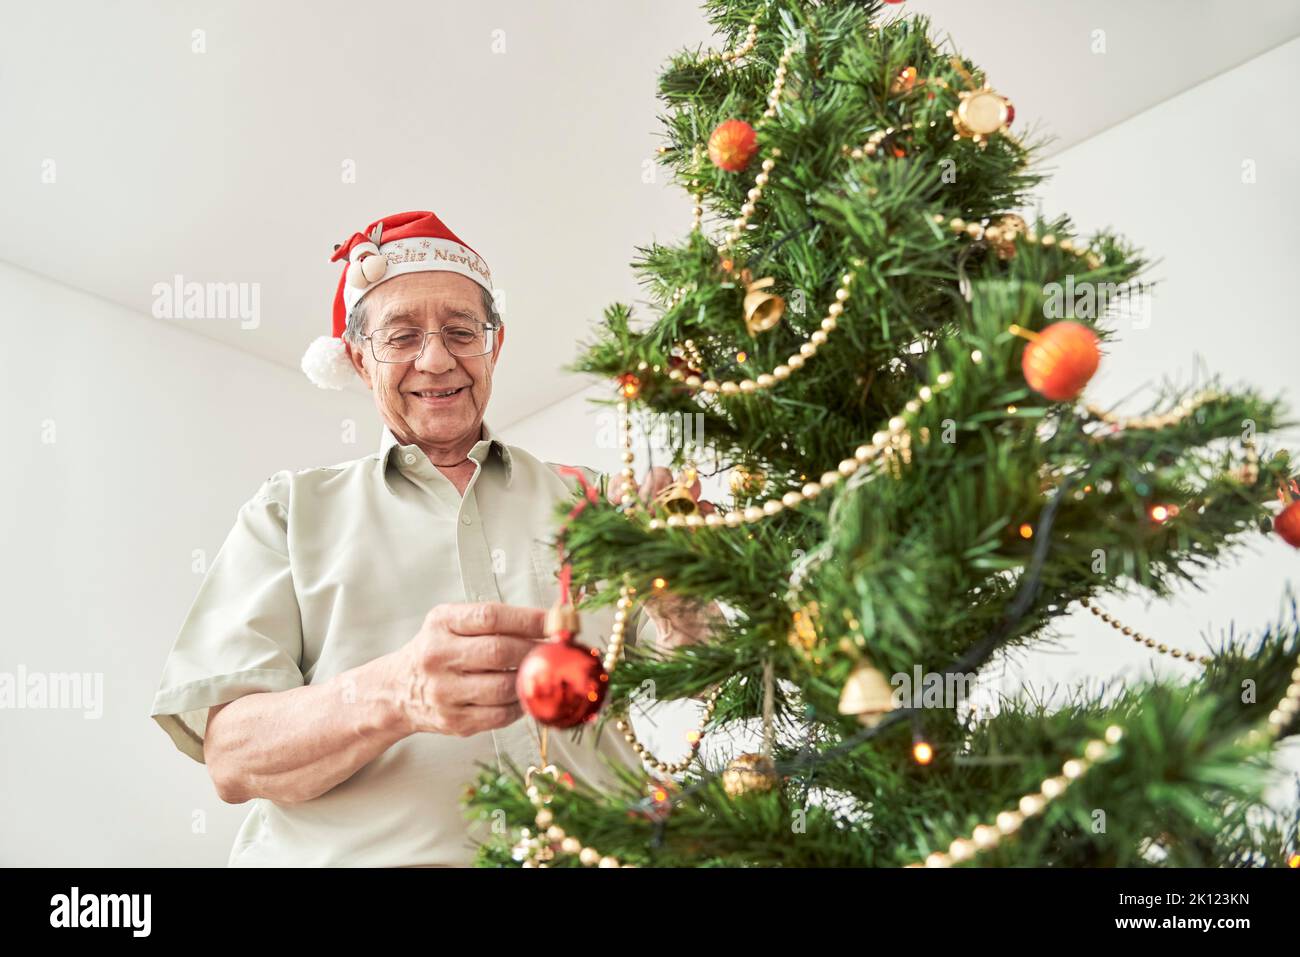 Happy senior hispanic man smiling while decorating a Christmas tree at home wearing a red Santa Claus hat with the text Merry Christmas. The happiness Stock Photo